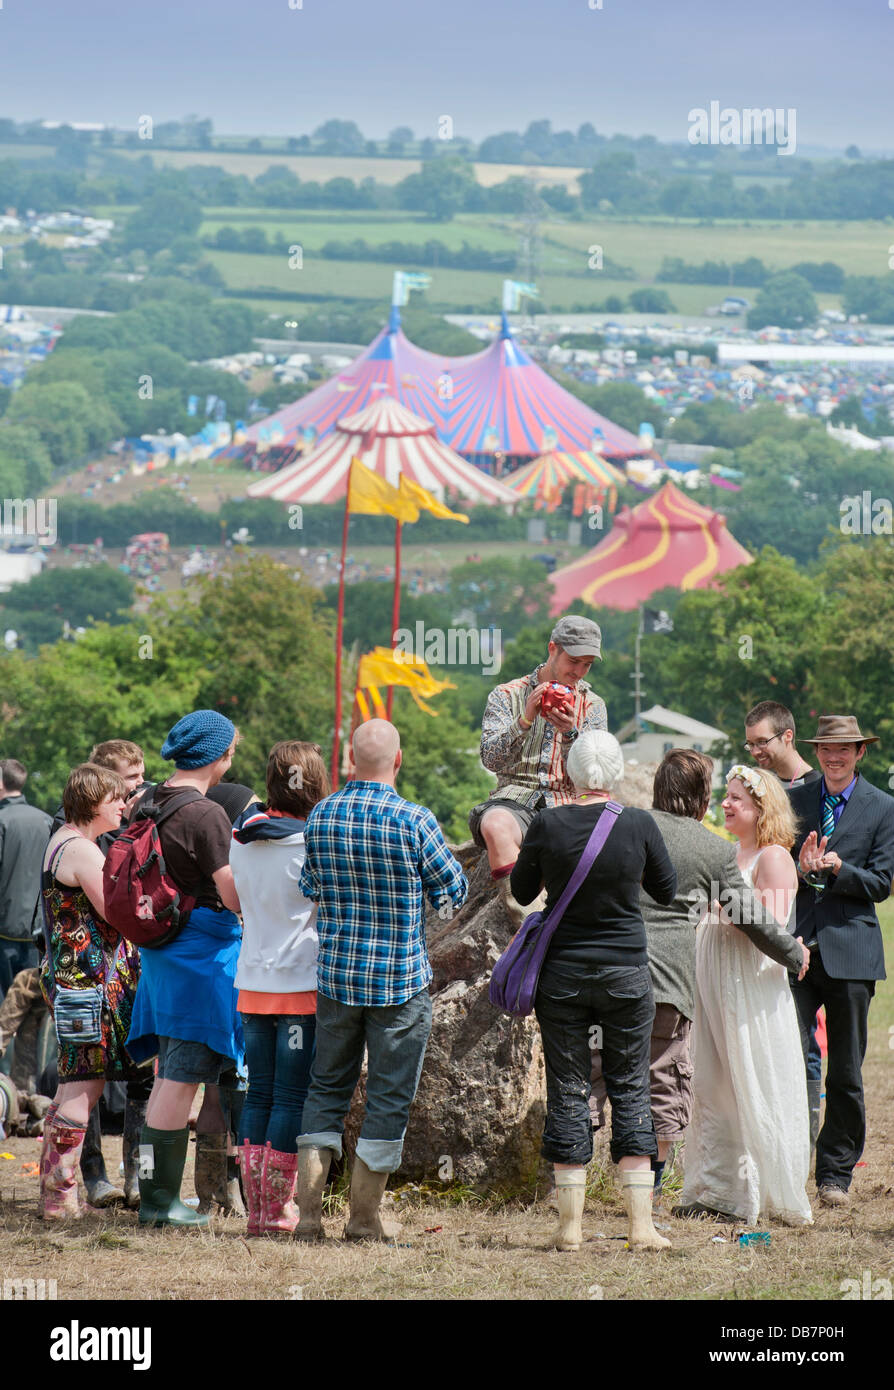 Glastonbury Festival 2013 - Mark and Rebecca Jordan from Bedfordshire bless their wedding at the stone circle. Stock Photo